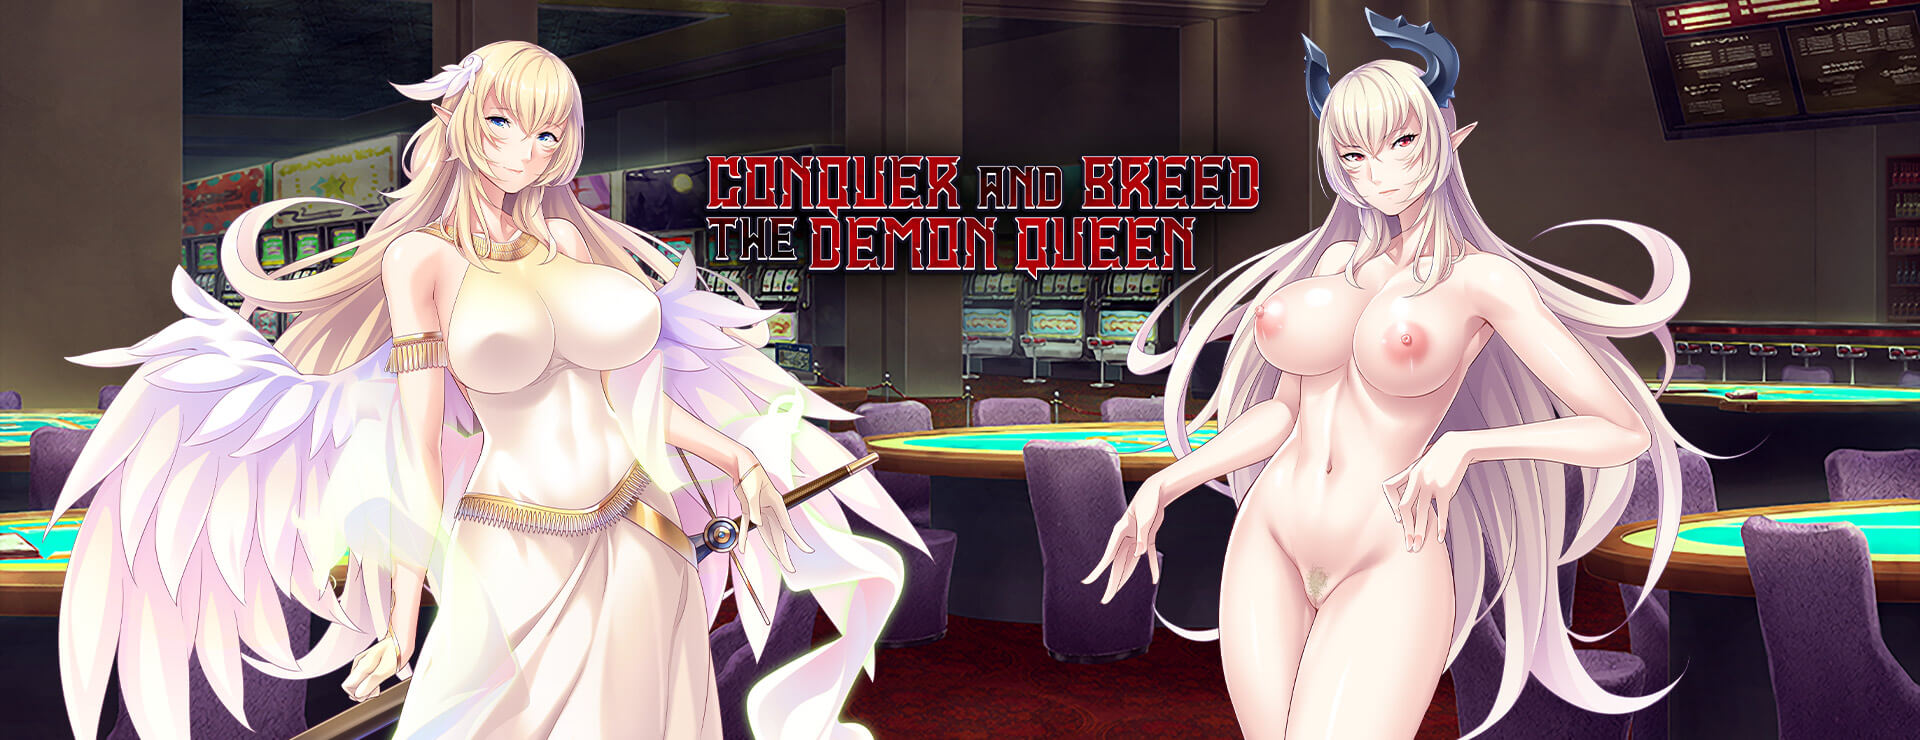 Conquer and Breed the Demon Queen - ビジュアルノベル ゲーム